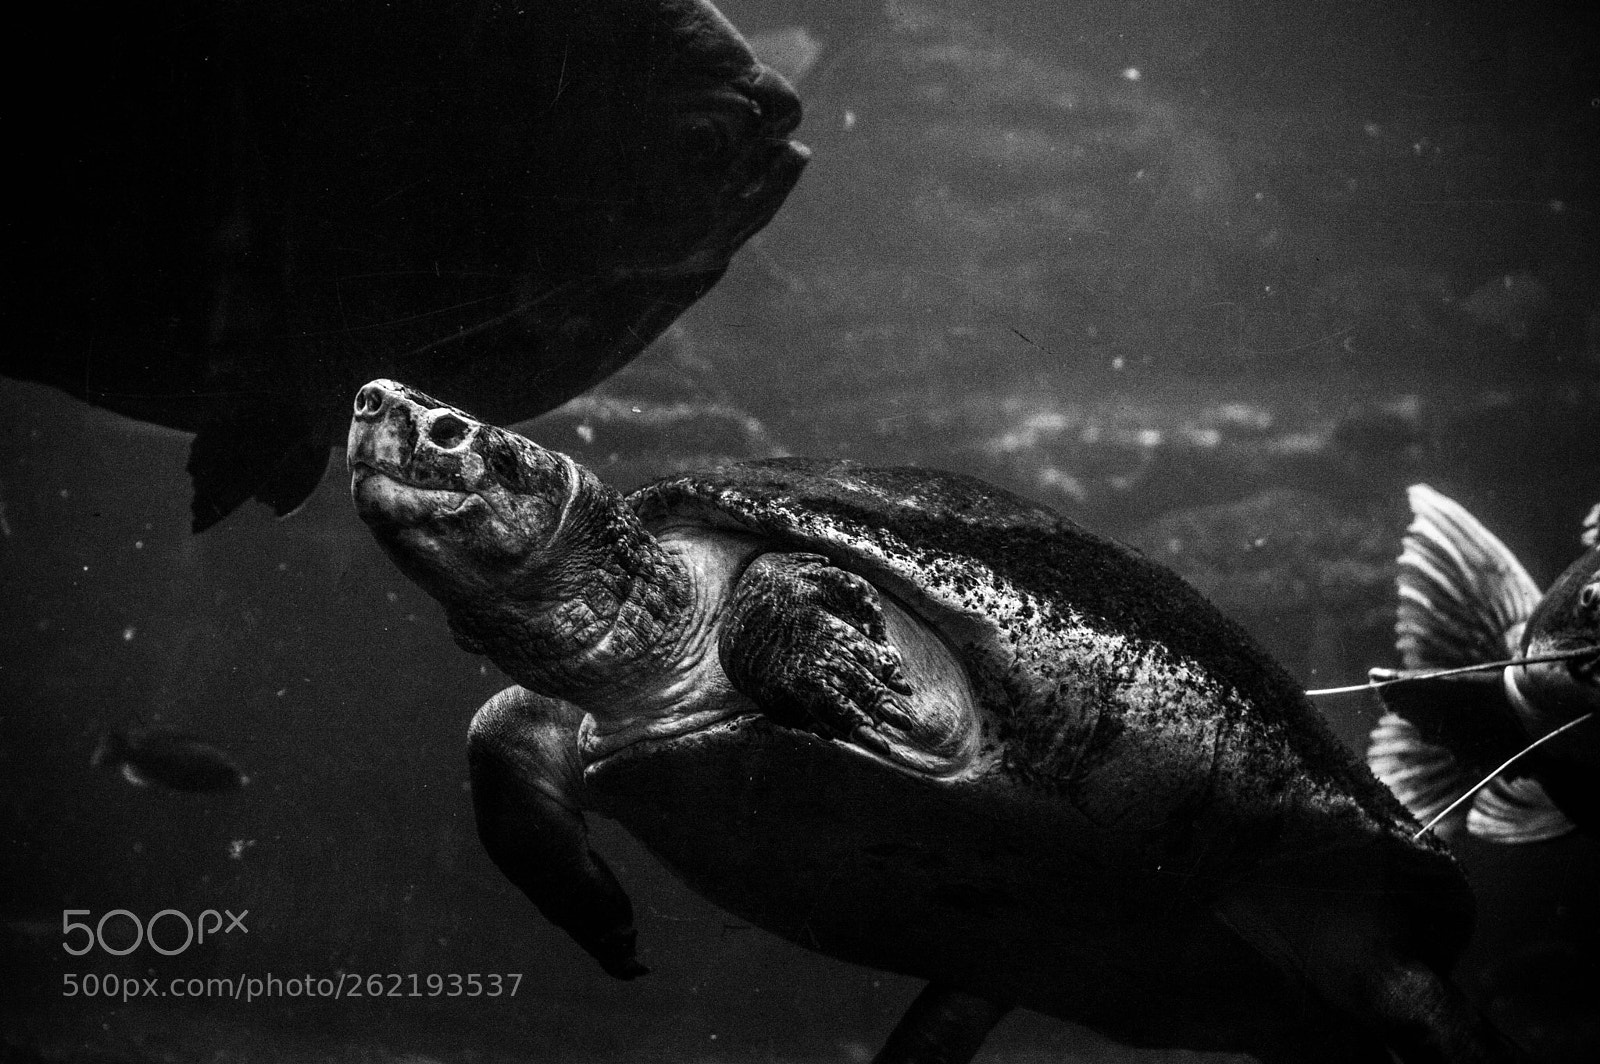 Nikon D3200 sample photo. Turtle in the water photography